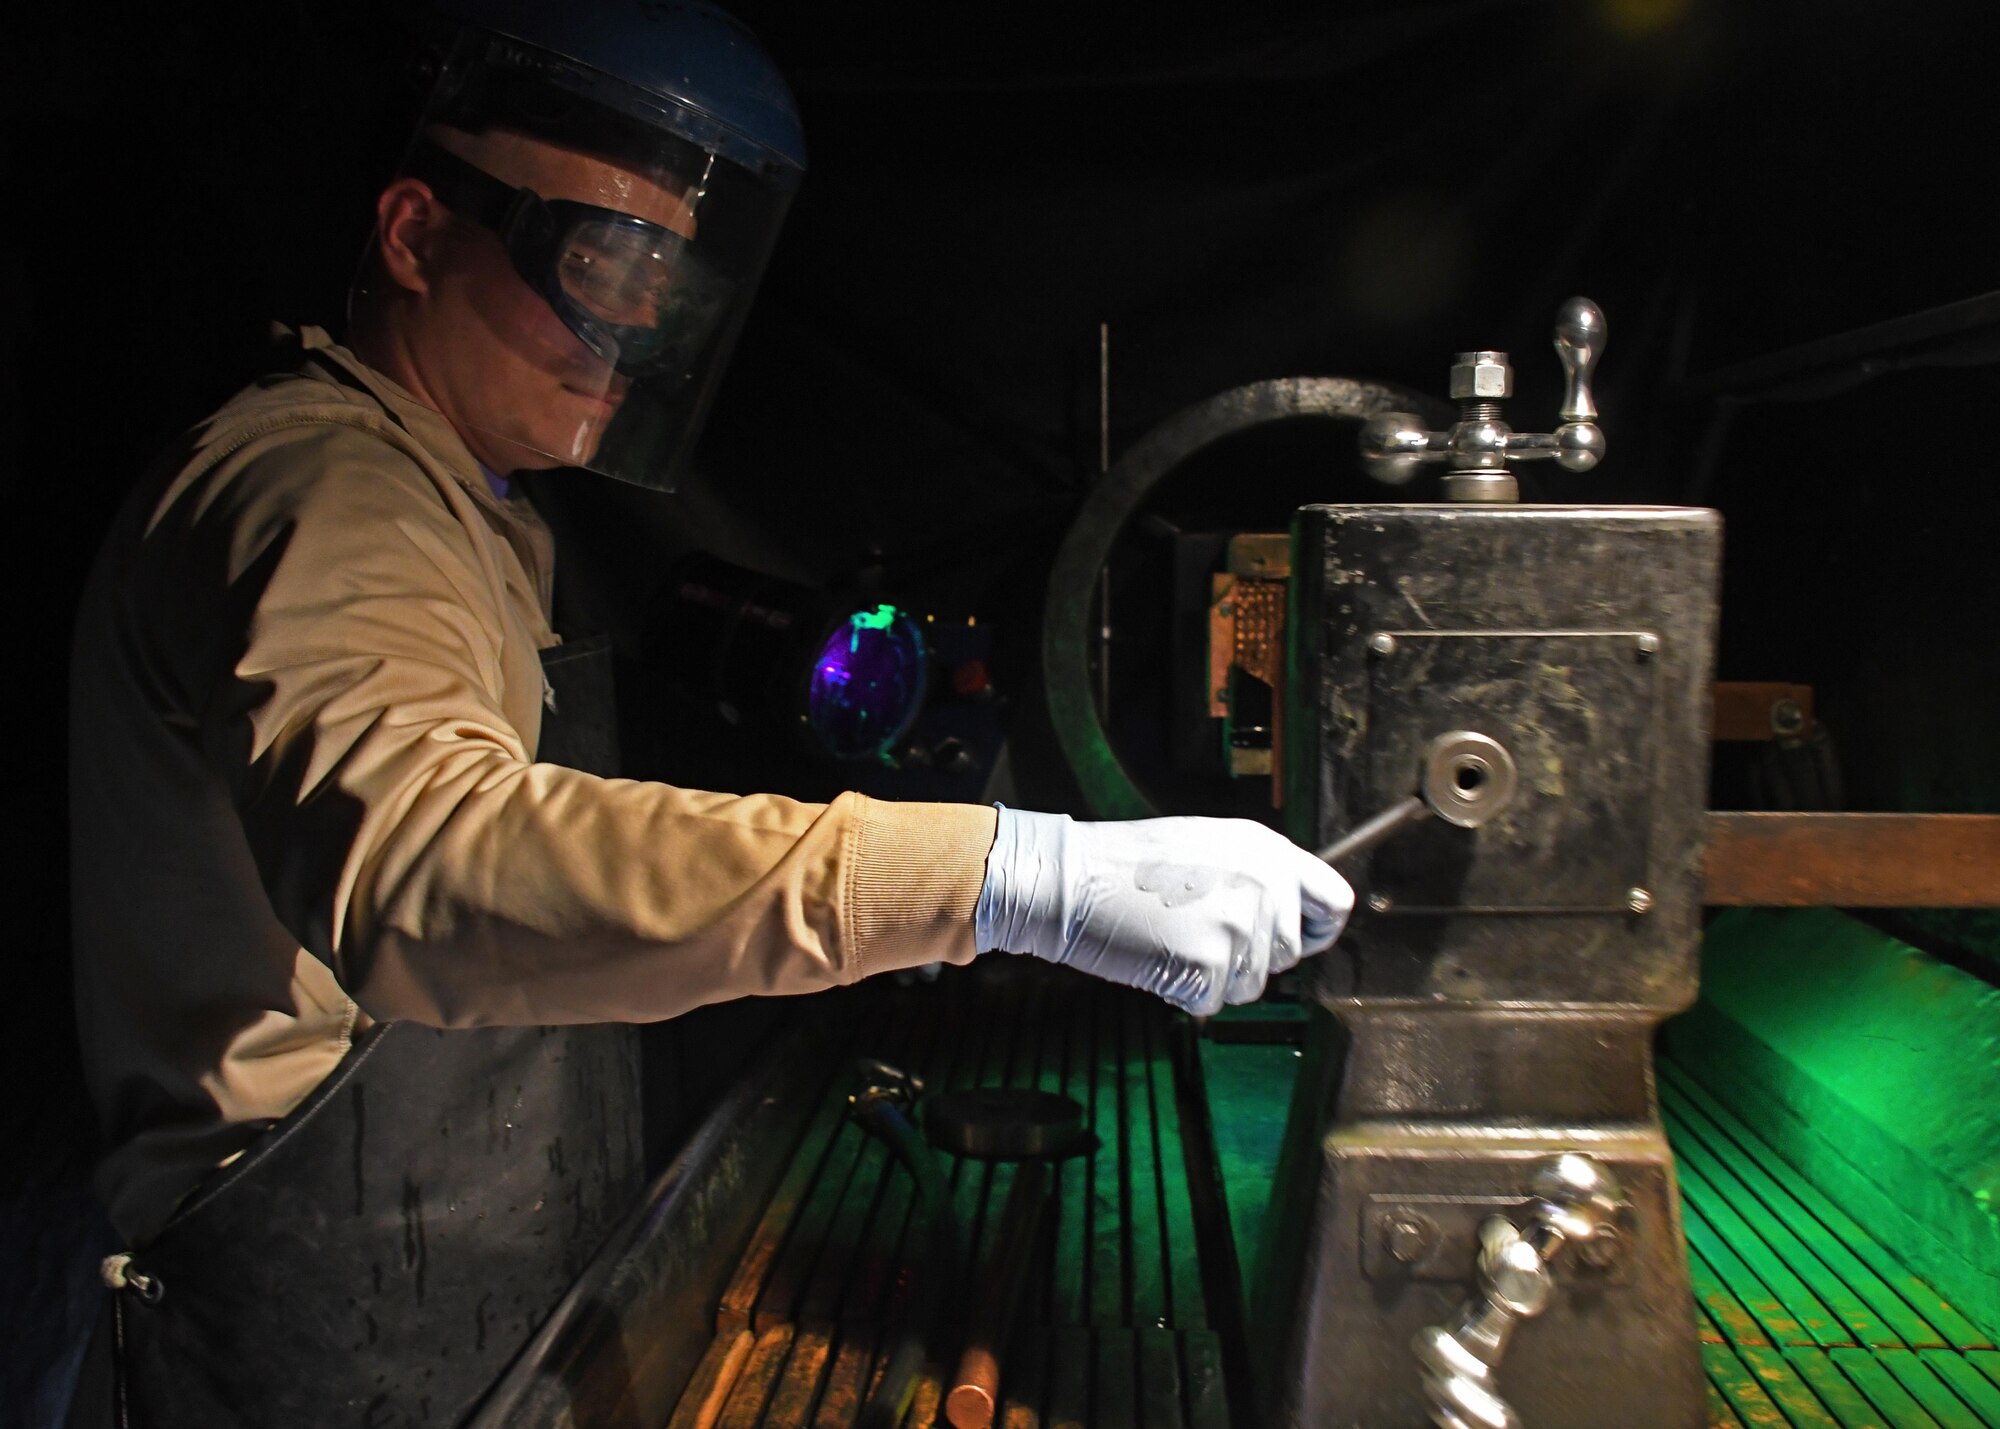 U.S. Air Force Airman 1st Class Austin Hall, a non-destructive inspection journeyman with the 379th Expeditionary Maintenance Squadron Fabrication Flight, prepares the magnetic inspection unit for a fluorescent penetrant inspection at Al Udeid Air Base, Qatar, Feb. 9, 2017. Hall conducted a magnetic particle inspection to look for defects in a piece of metal. (U.S. Air Force photo by Senior Airman Miles Wilson)